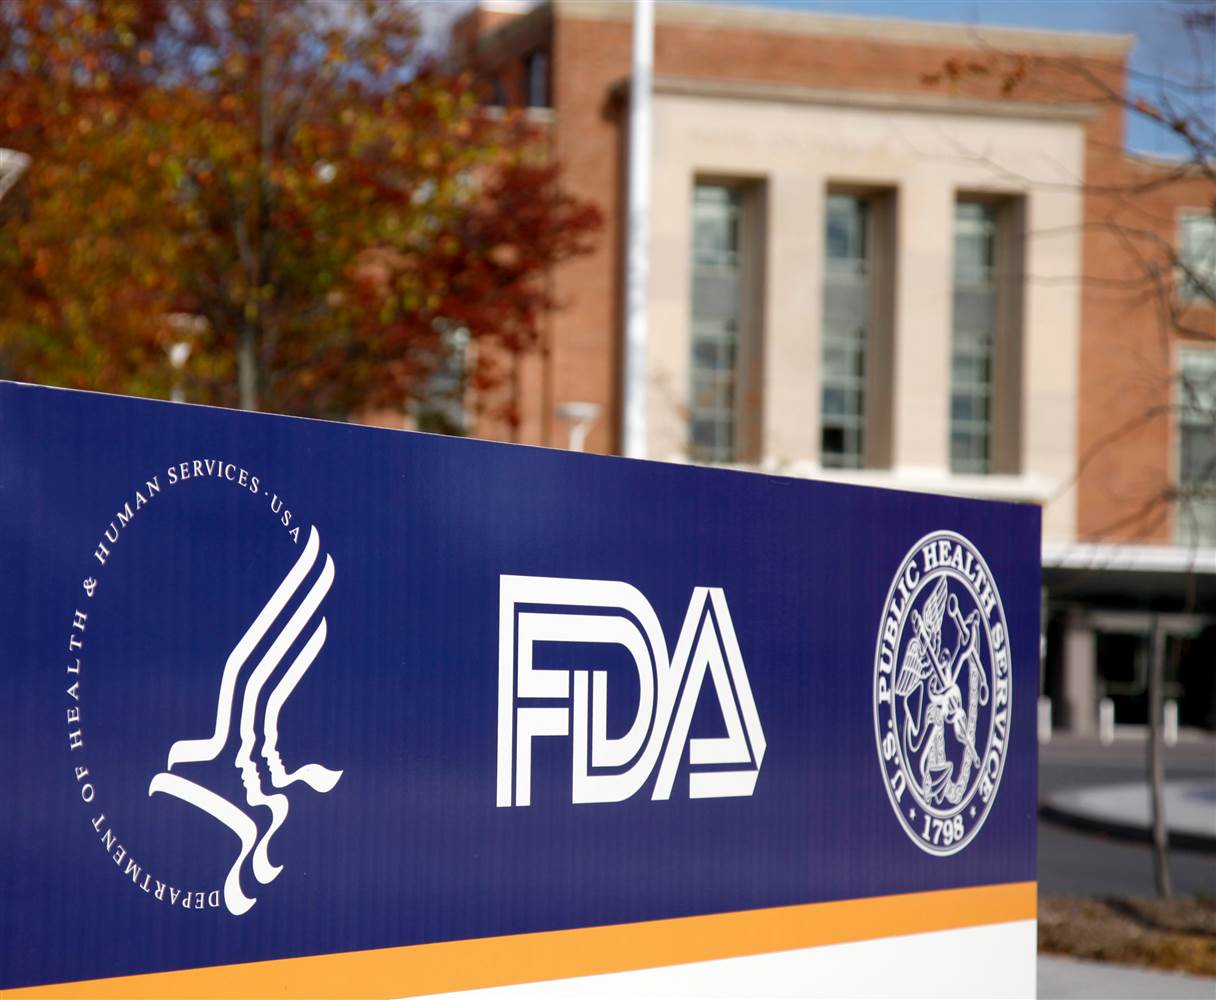 Bristol-Myers Squibb Gets FDA Approval for its Liver Drug Opdivo